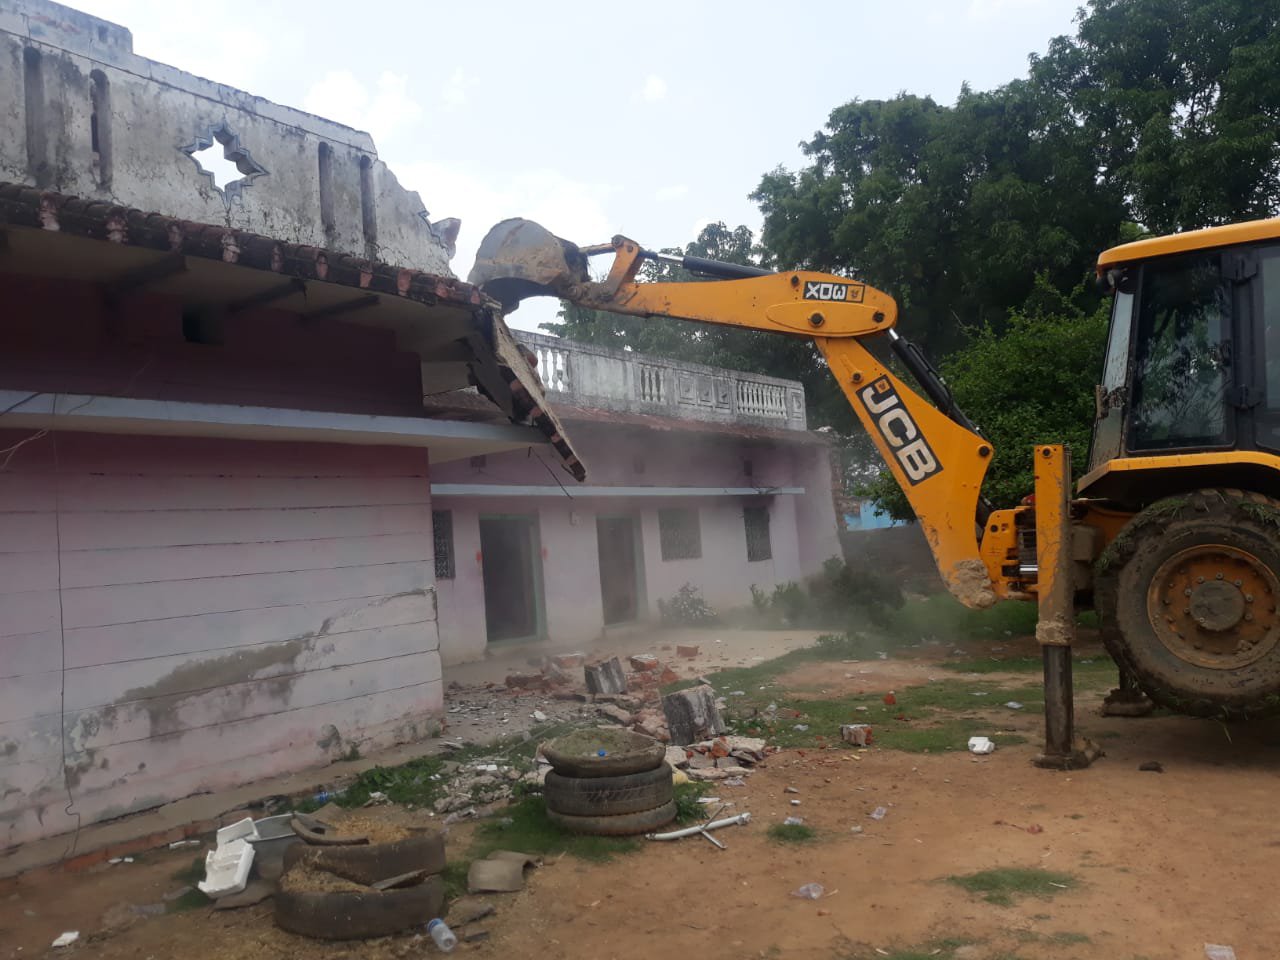 order of the High Court demolished BJP leader's illegal house